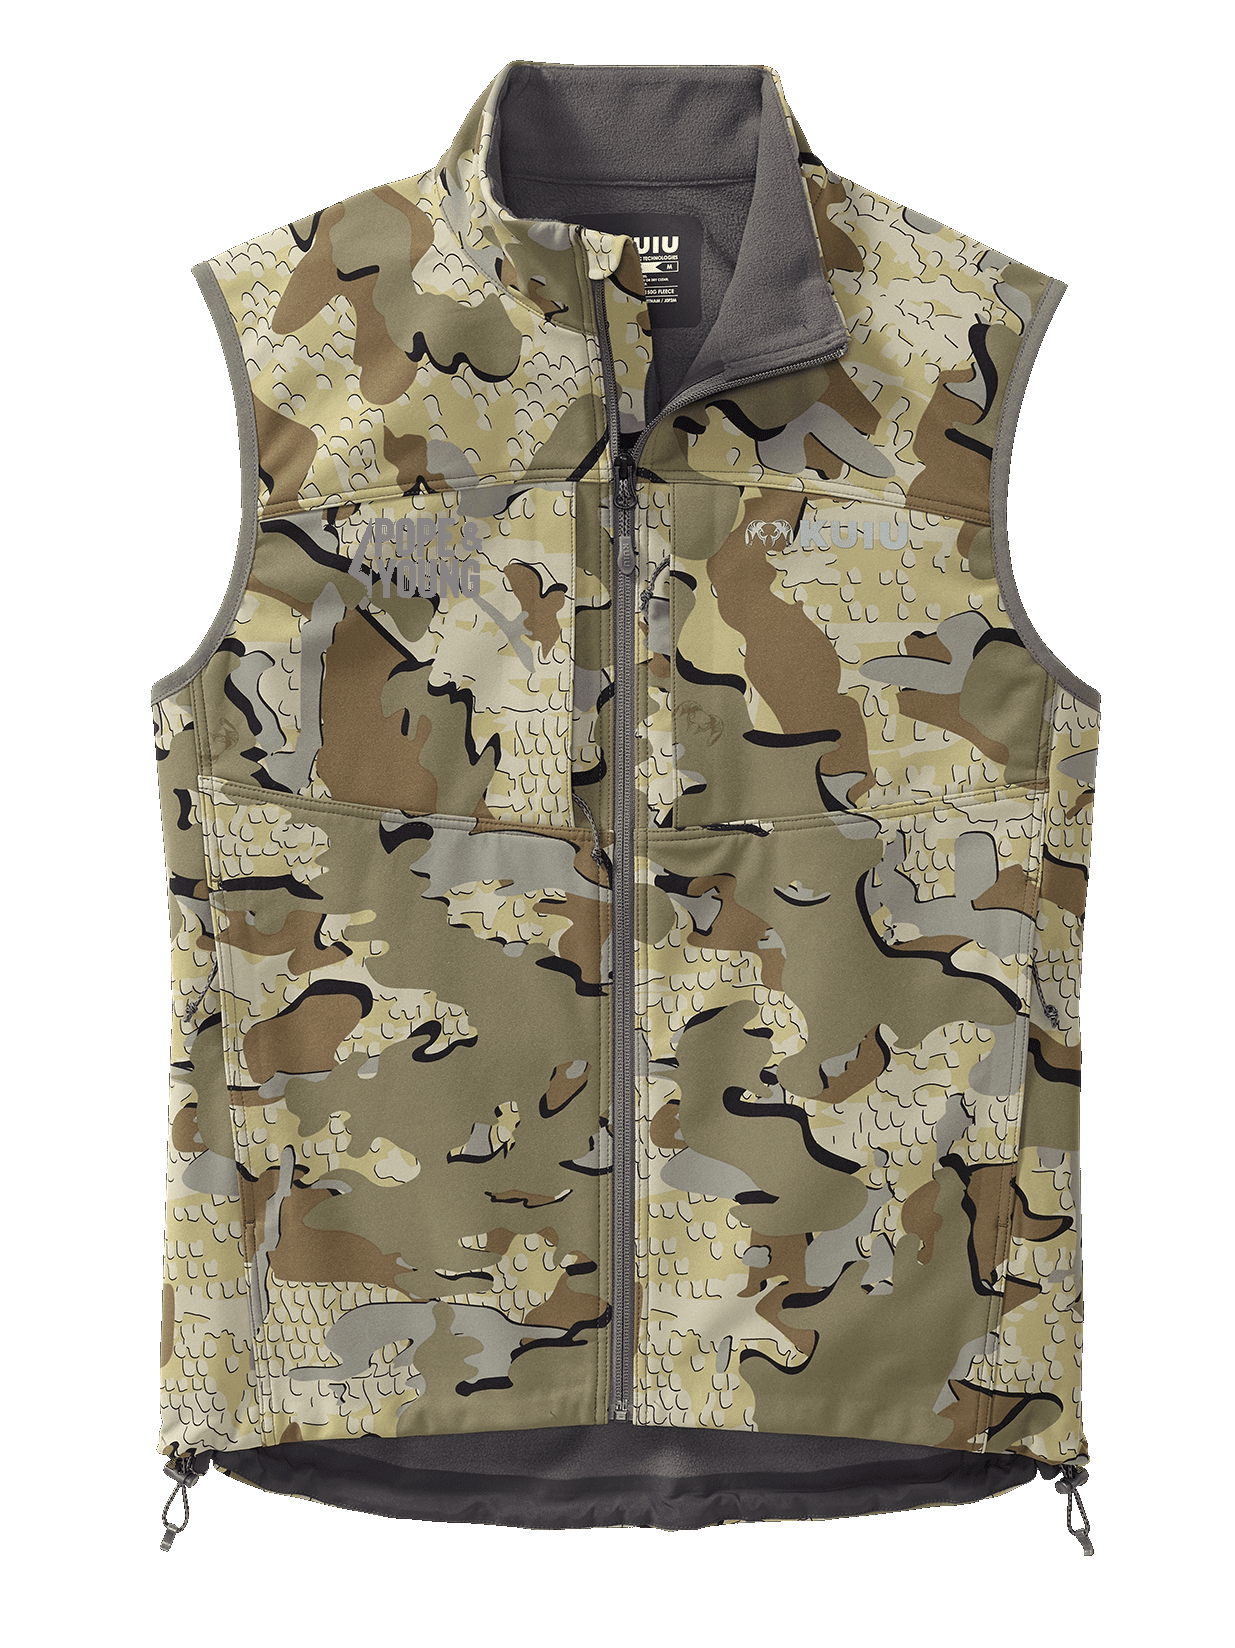 Pope & Young KUIU Guide DCS Vest Valo Camo